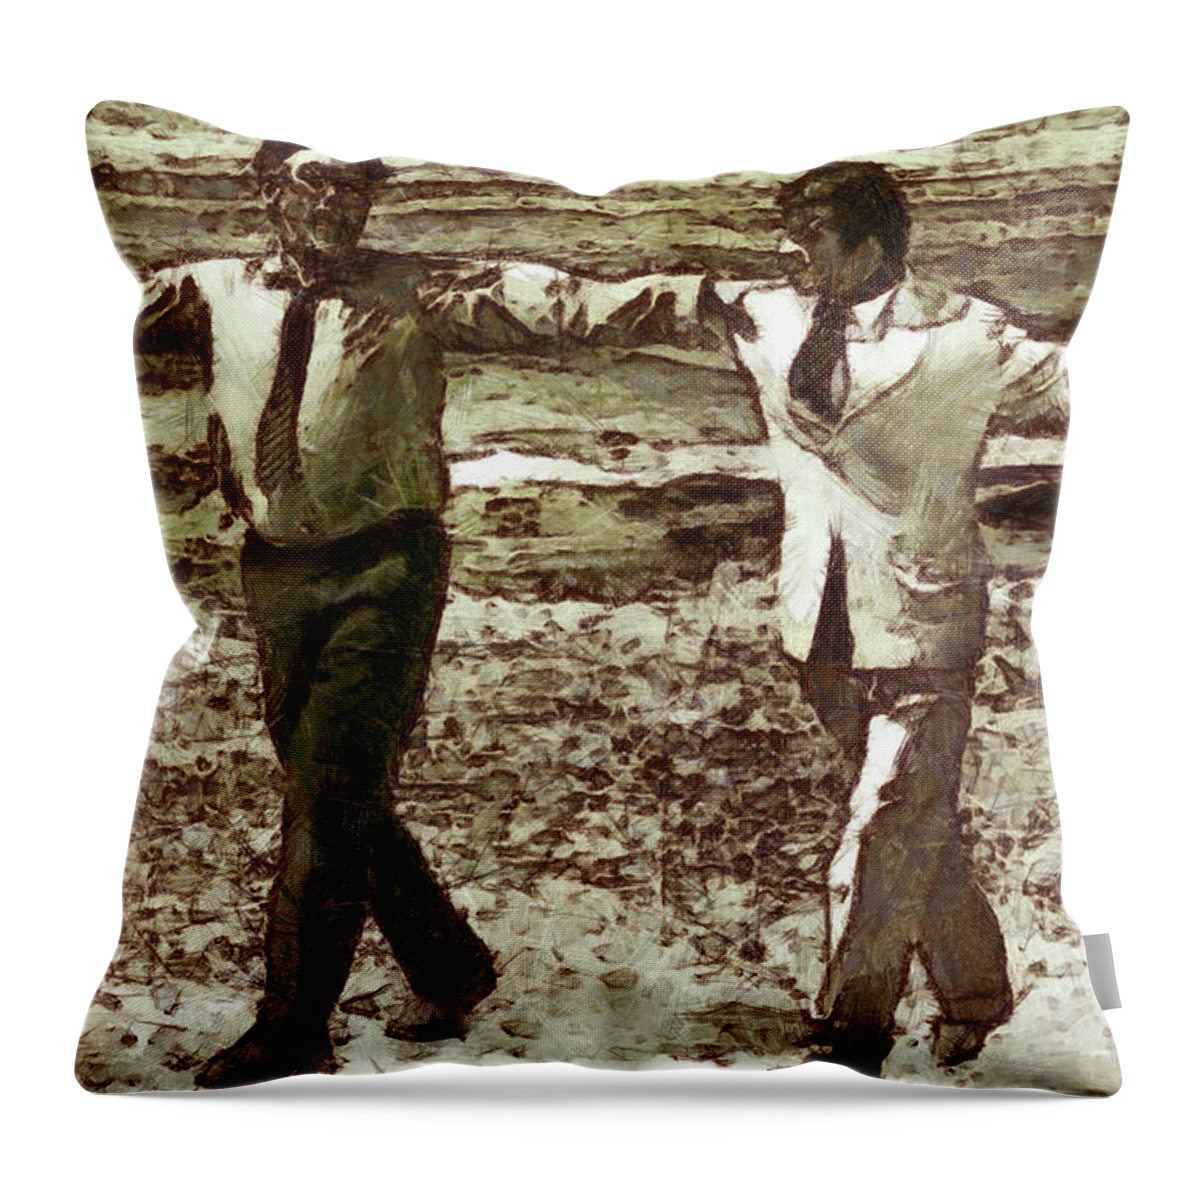 Zorba Dance Throw Pillow featuring the painting Zorba dance by George Rossidis